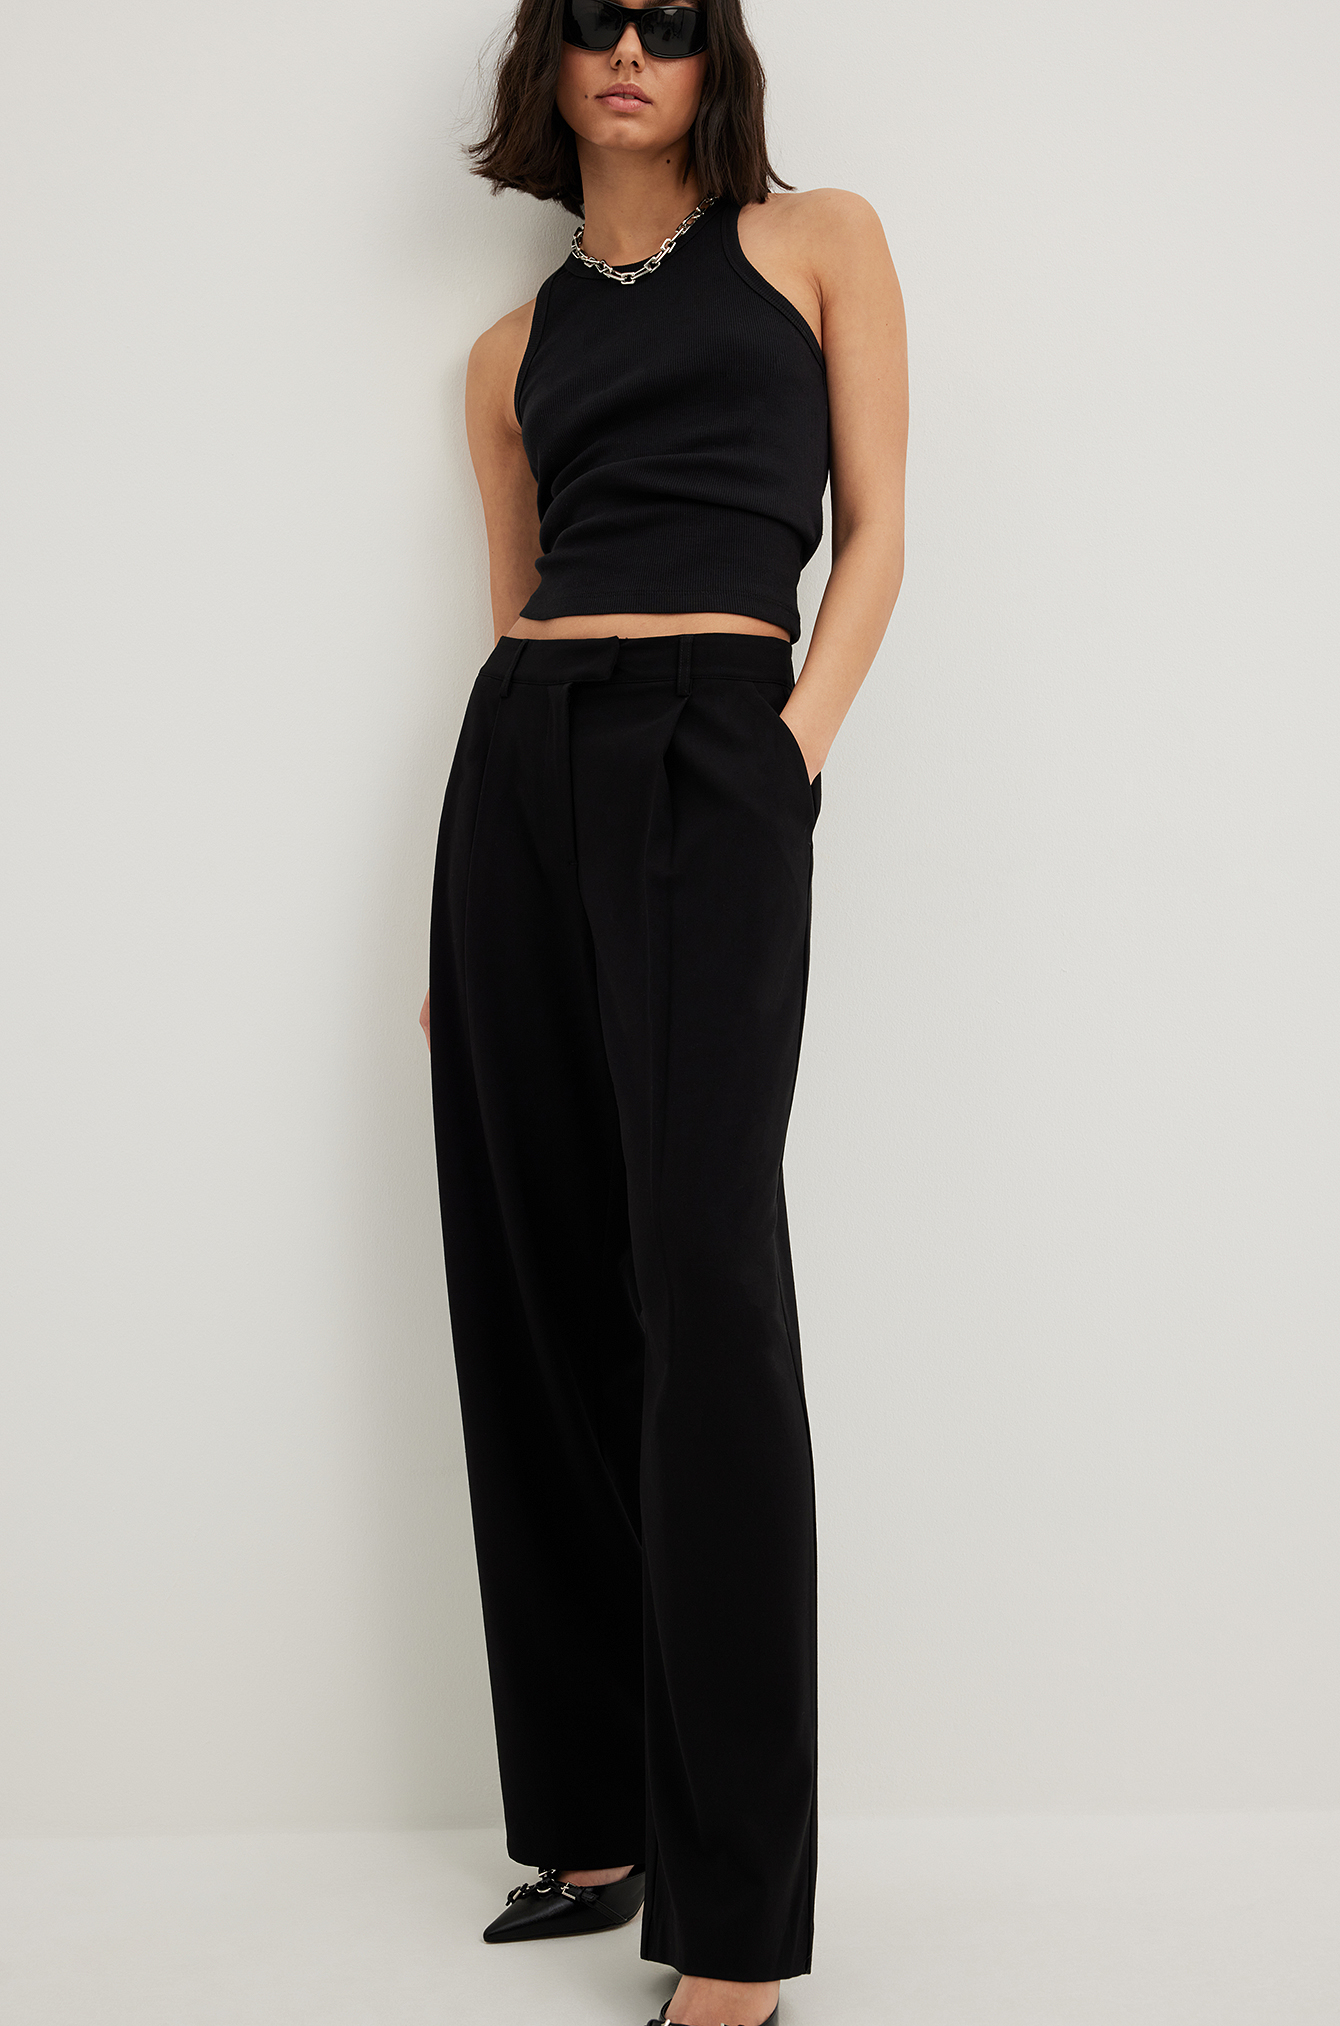 Flared Tailored Suit Pants Black